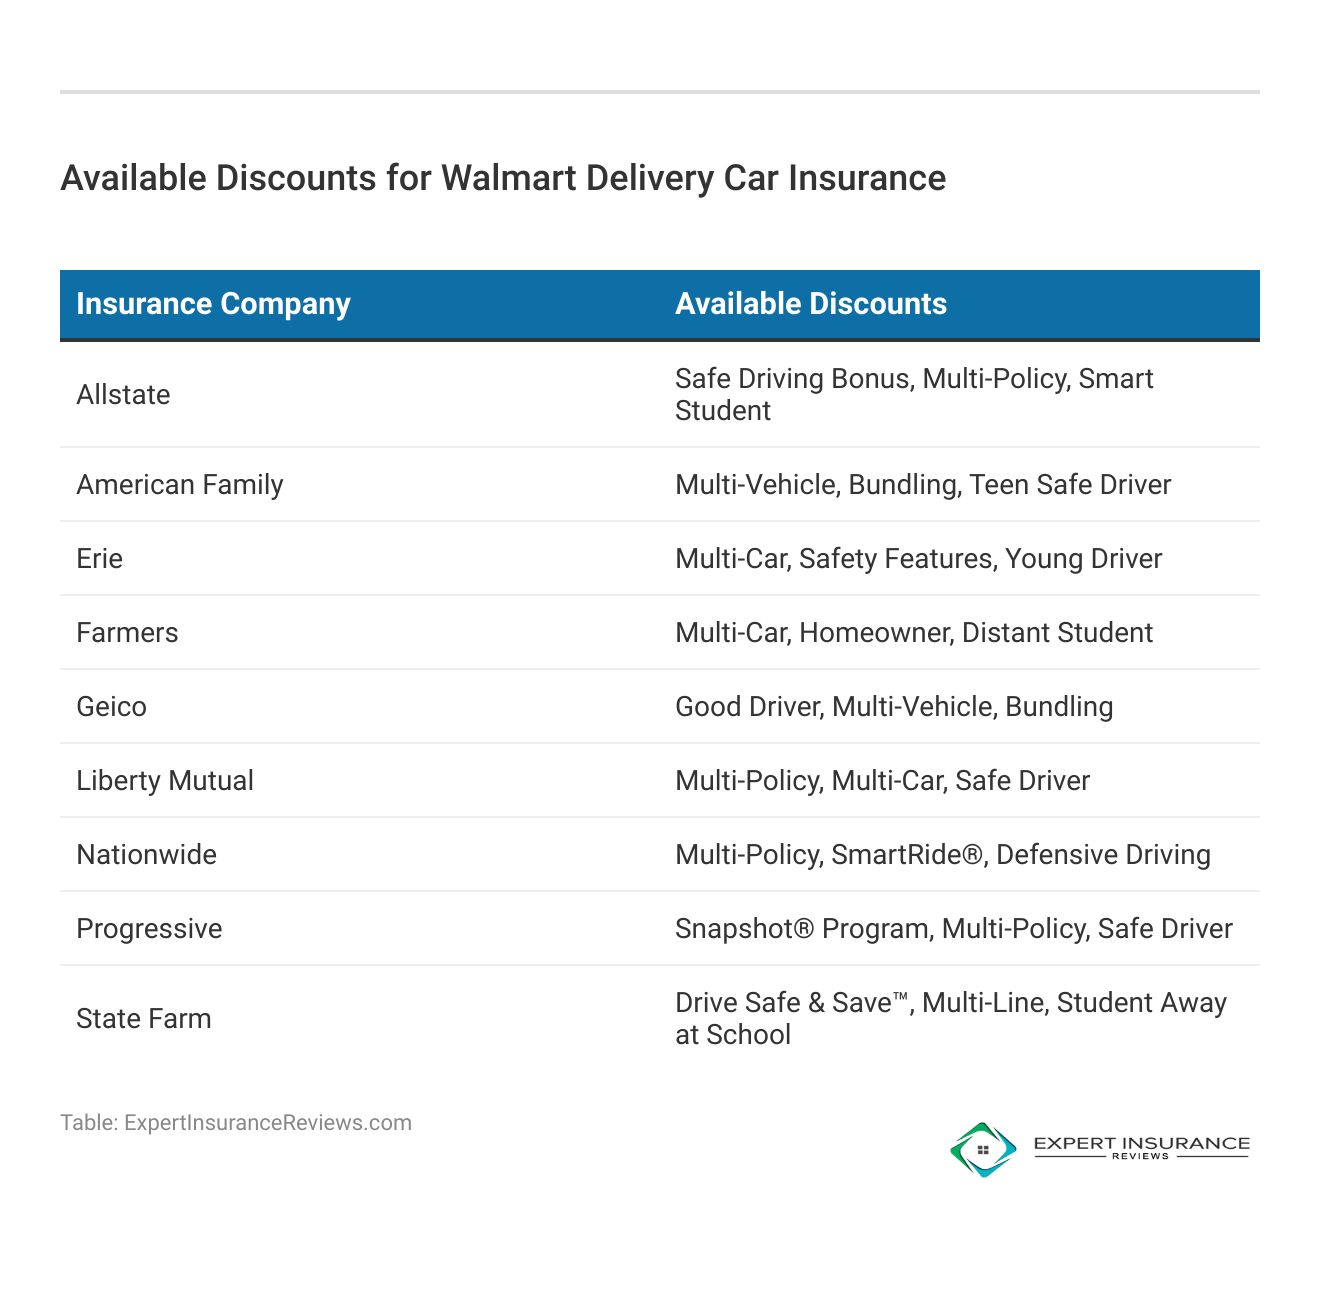 <h3>Available Discounts for Walmart Delivery Car Insurance</h3>